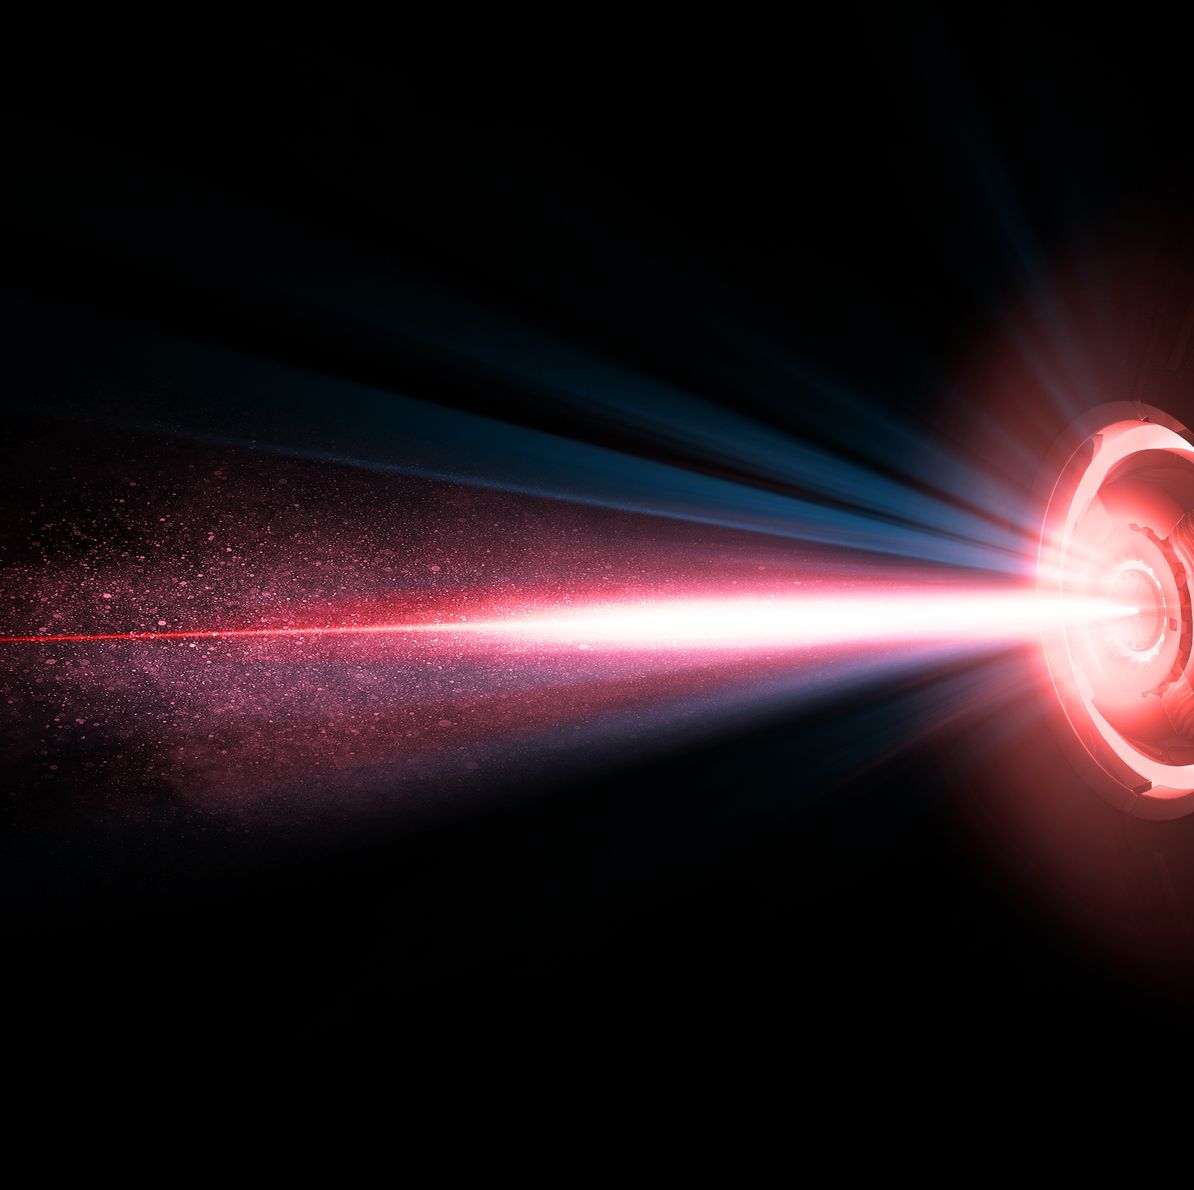 Scientists Are Actively Building a Real-Life Tractor Beam. Seriously.